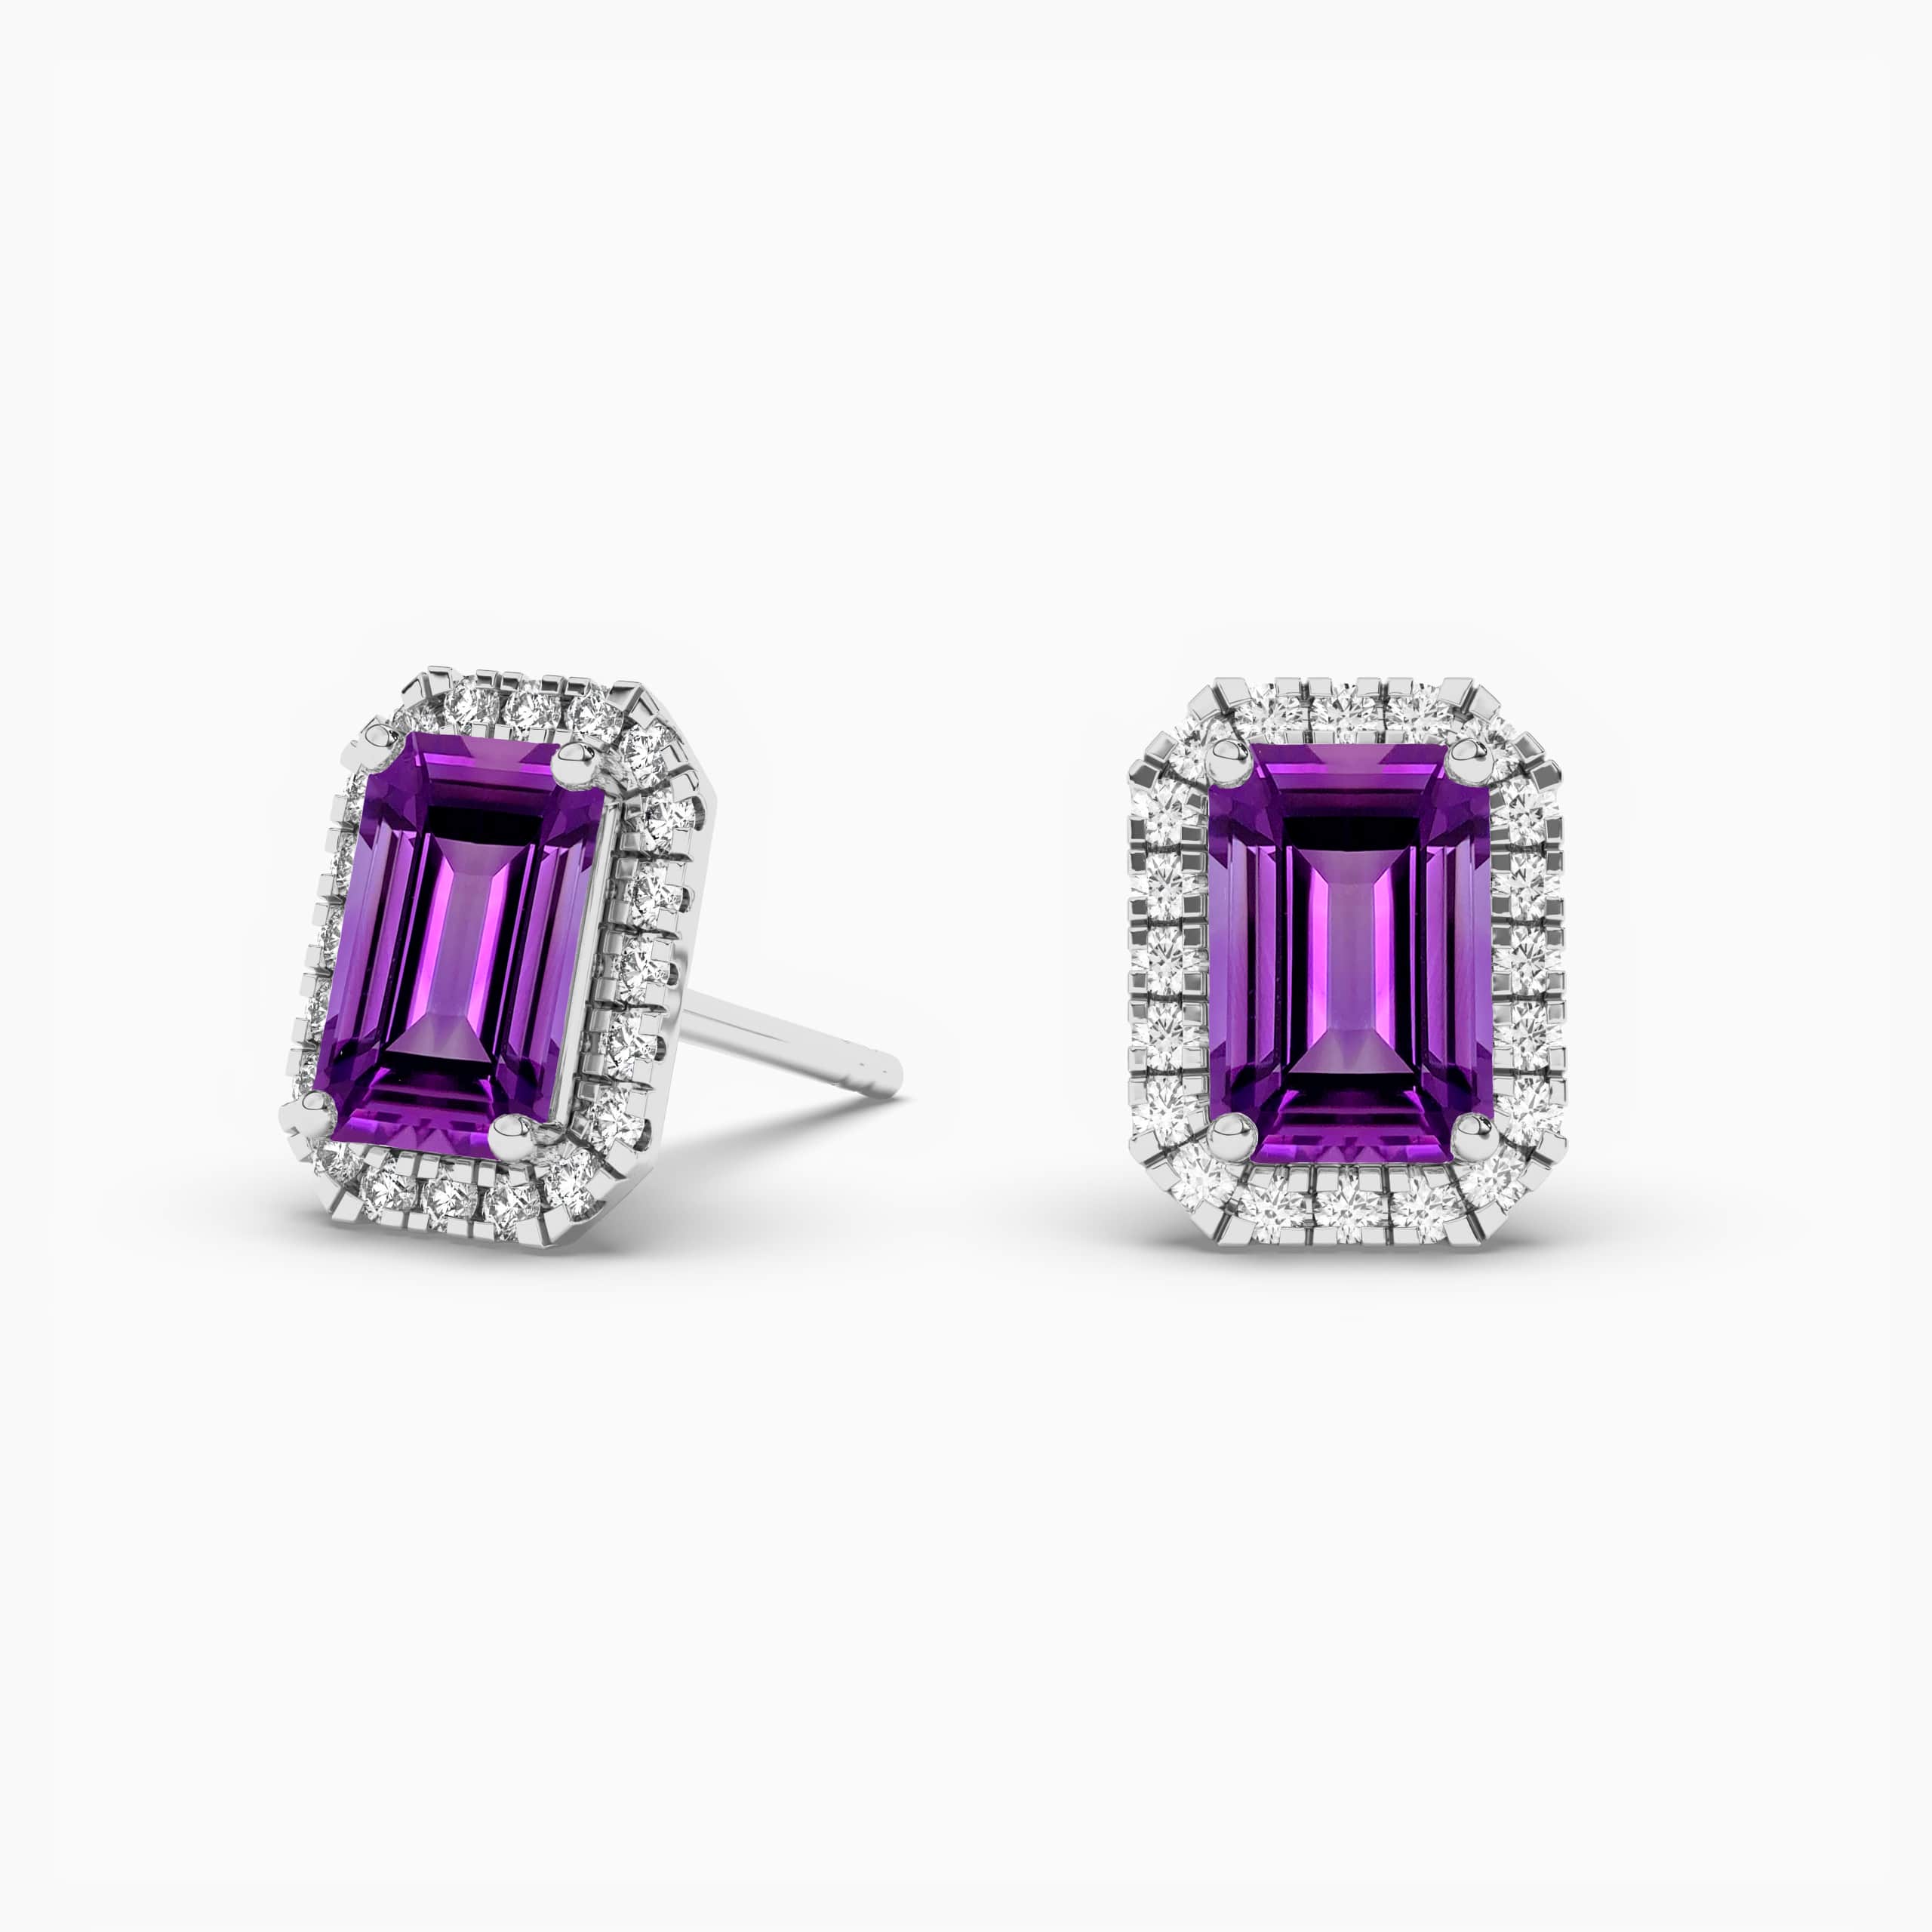 Emerald Cut Amethyst And Diamond Halo Earrings In White Gold